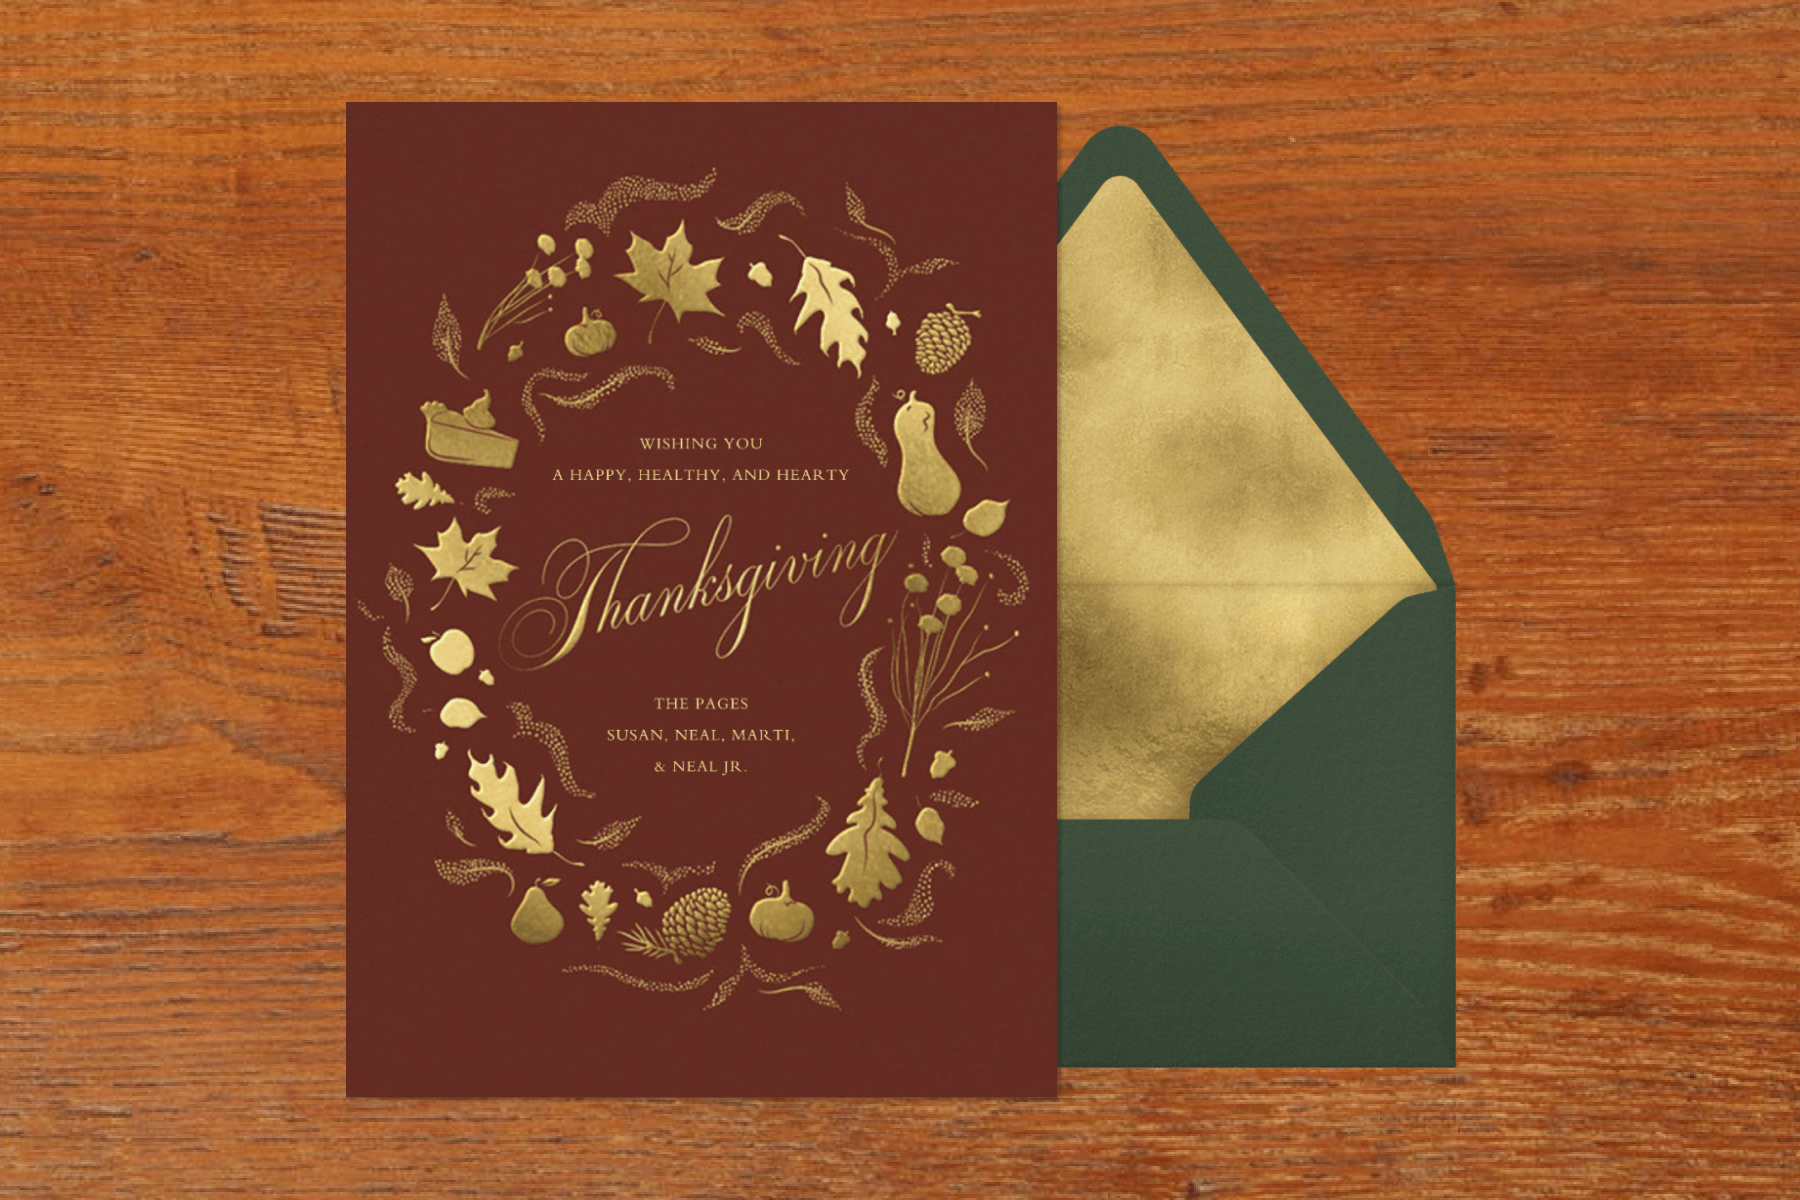 A brown and gold Thanksgiving card with fall-themed illustrations like pie, leaves, and pine cones.